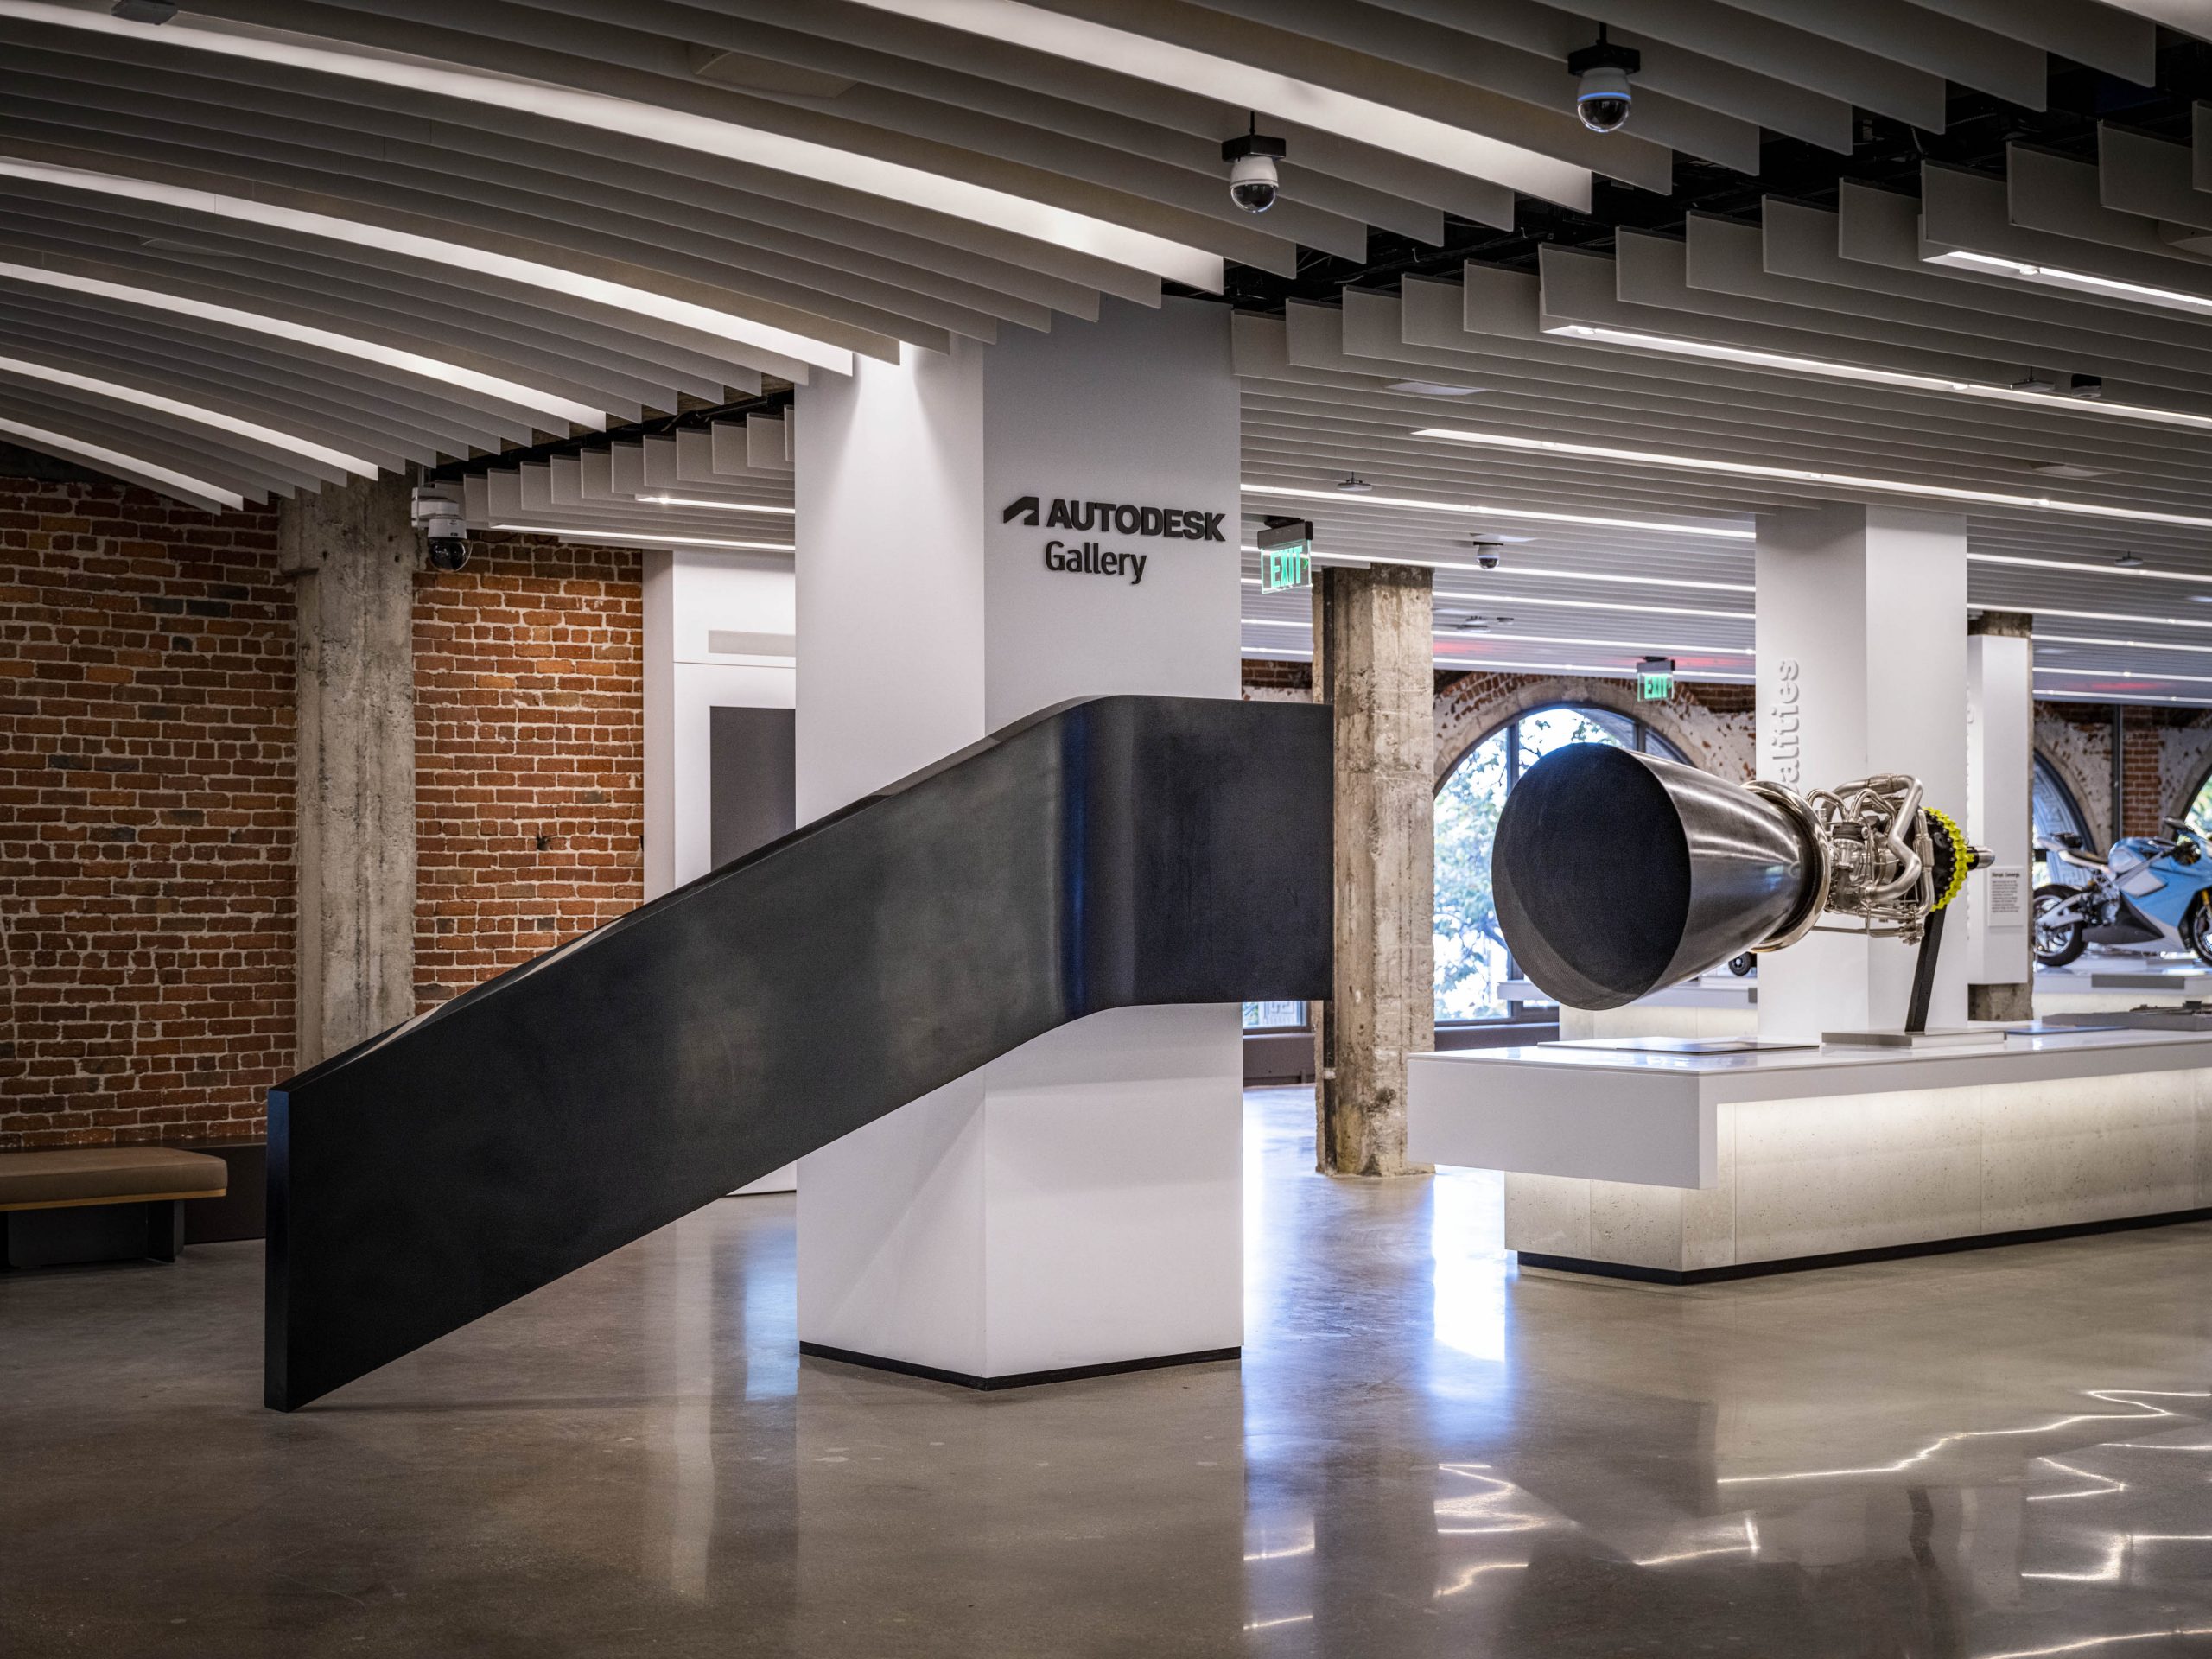 Interior of the reimagined Autodesk Gallery in San Francisco, CA.